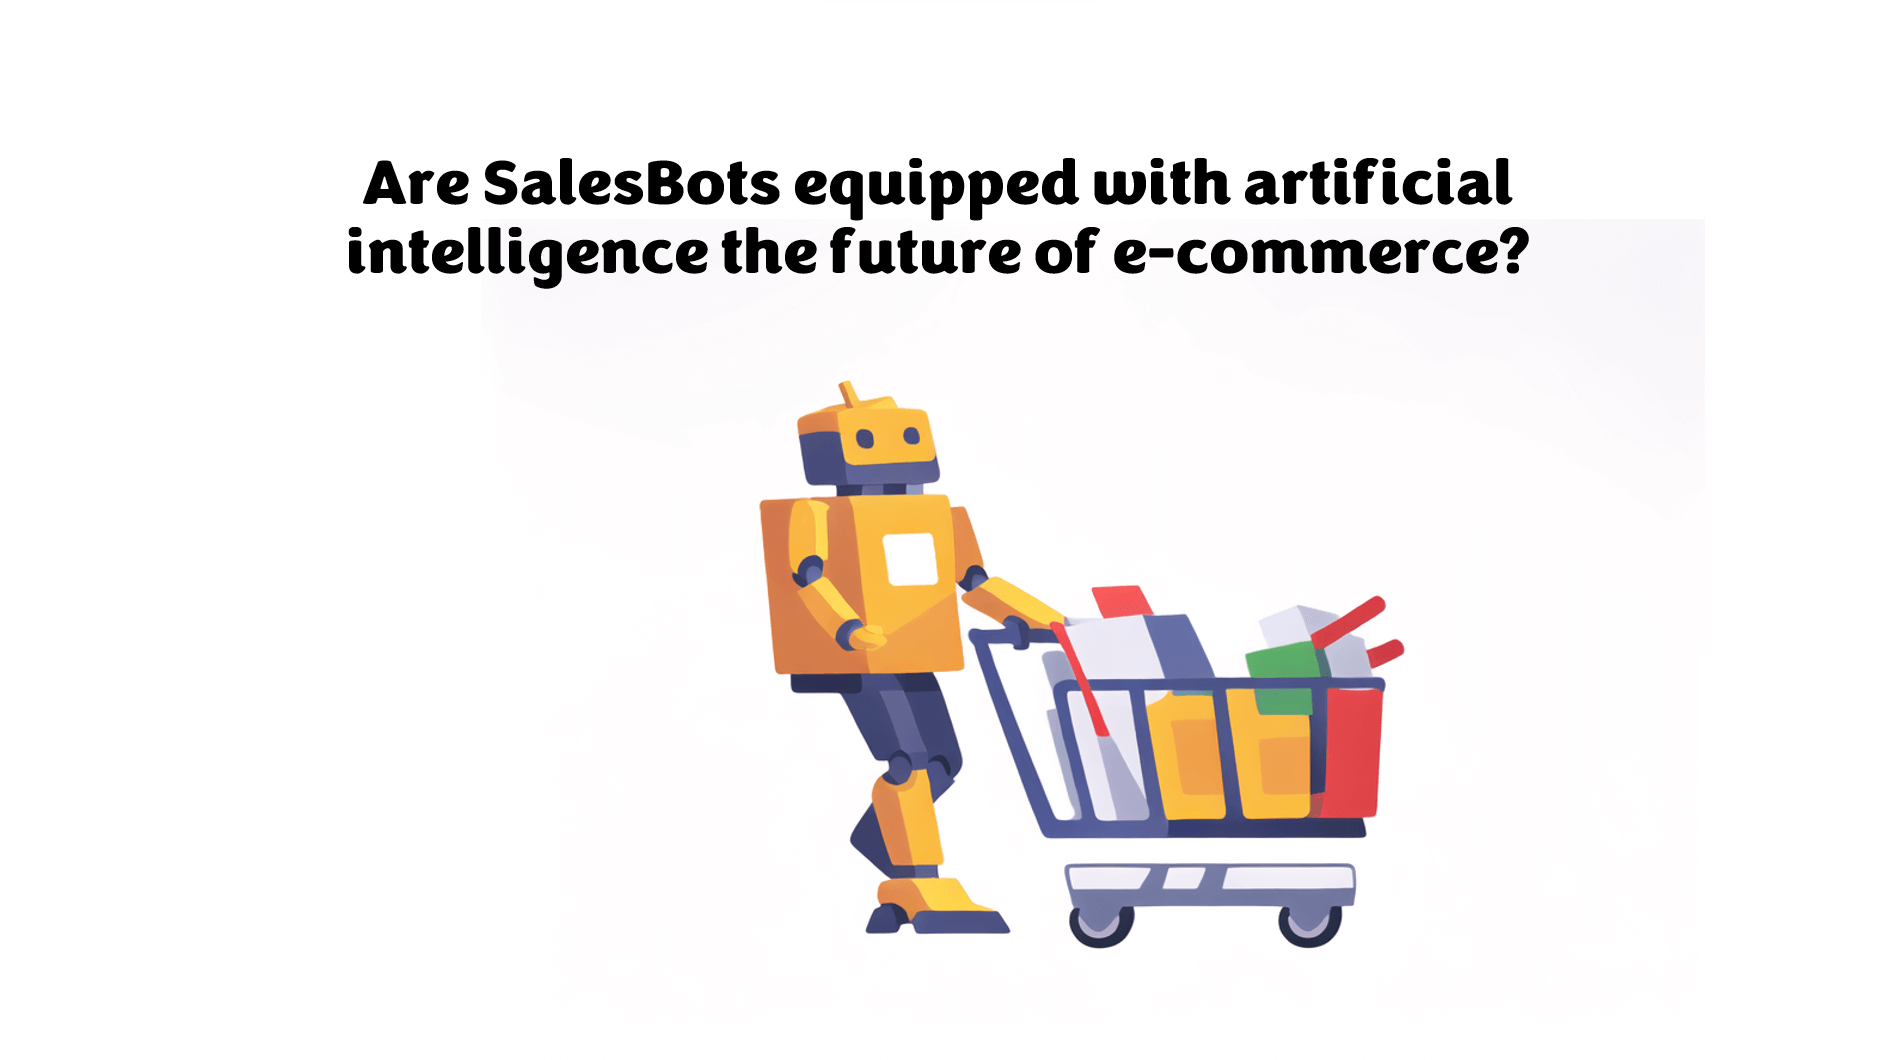 Are SalesBots equipped with artificial intelligence the future of e-commerce?